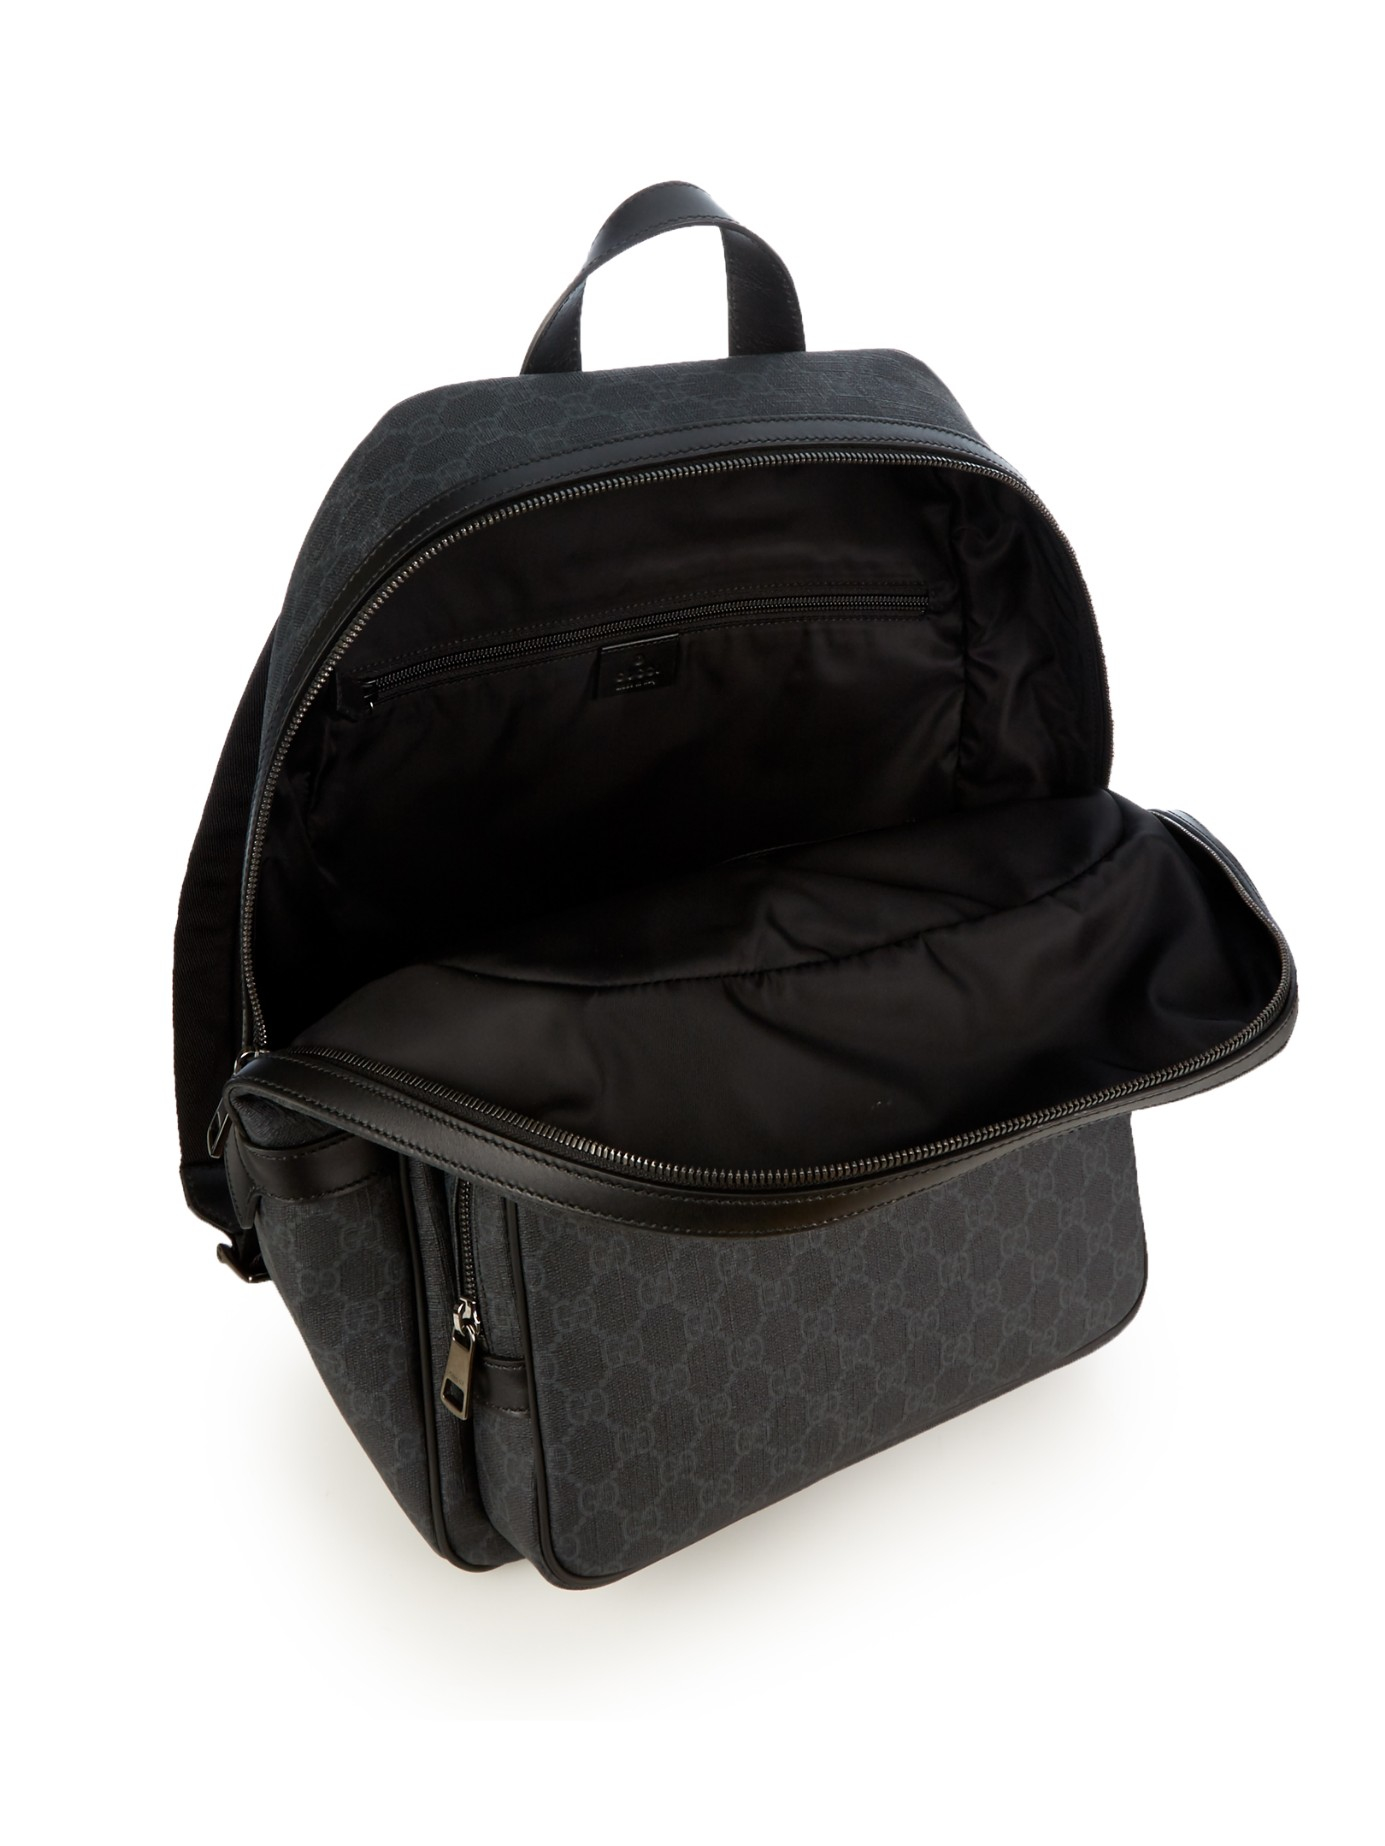 Black GG-canvas and leather backpack, Gucci